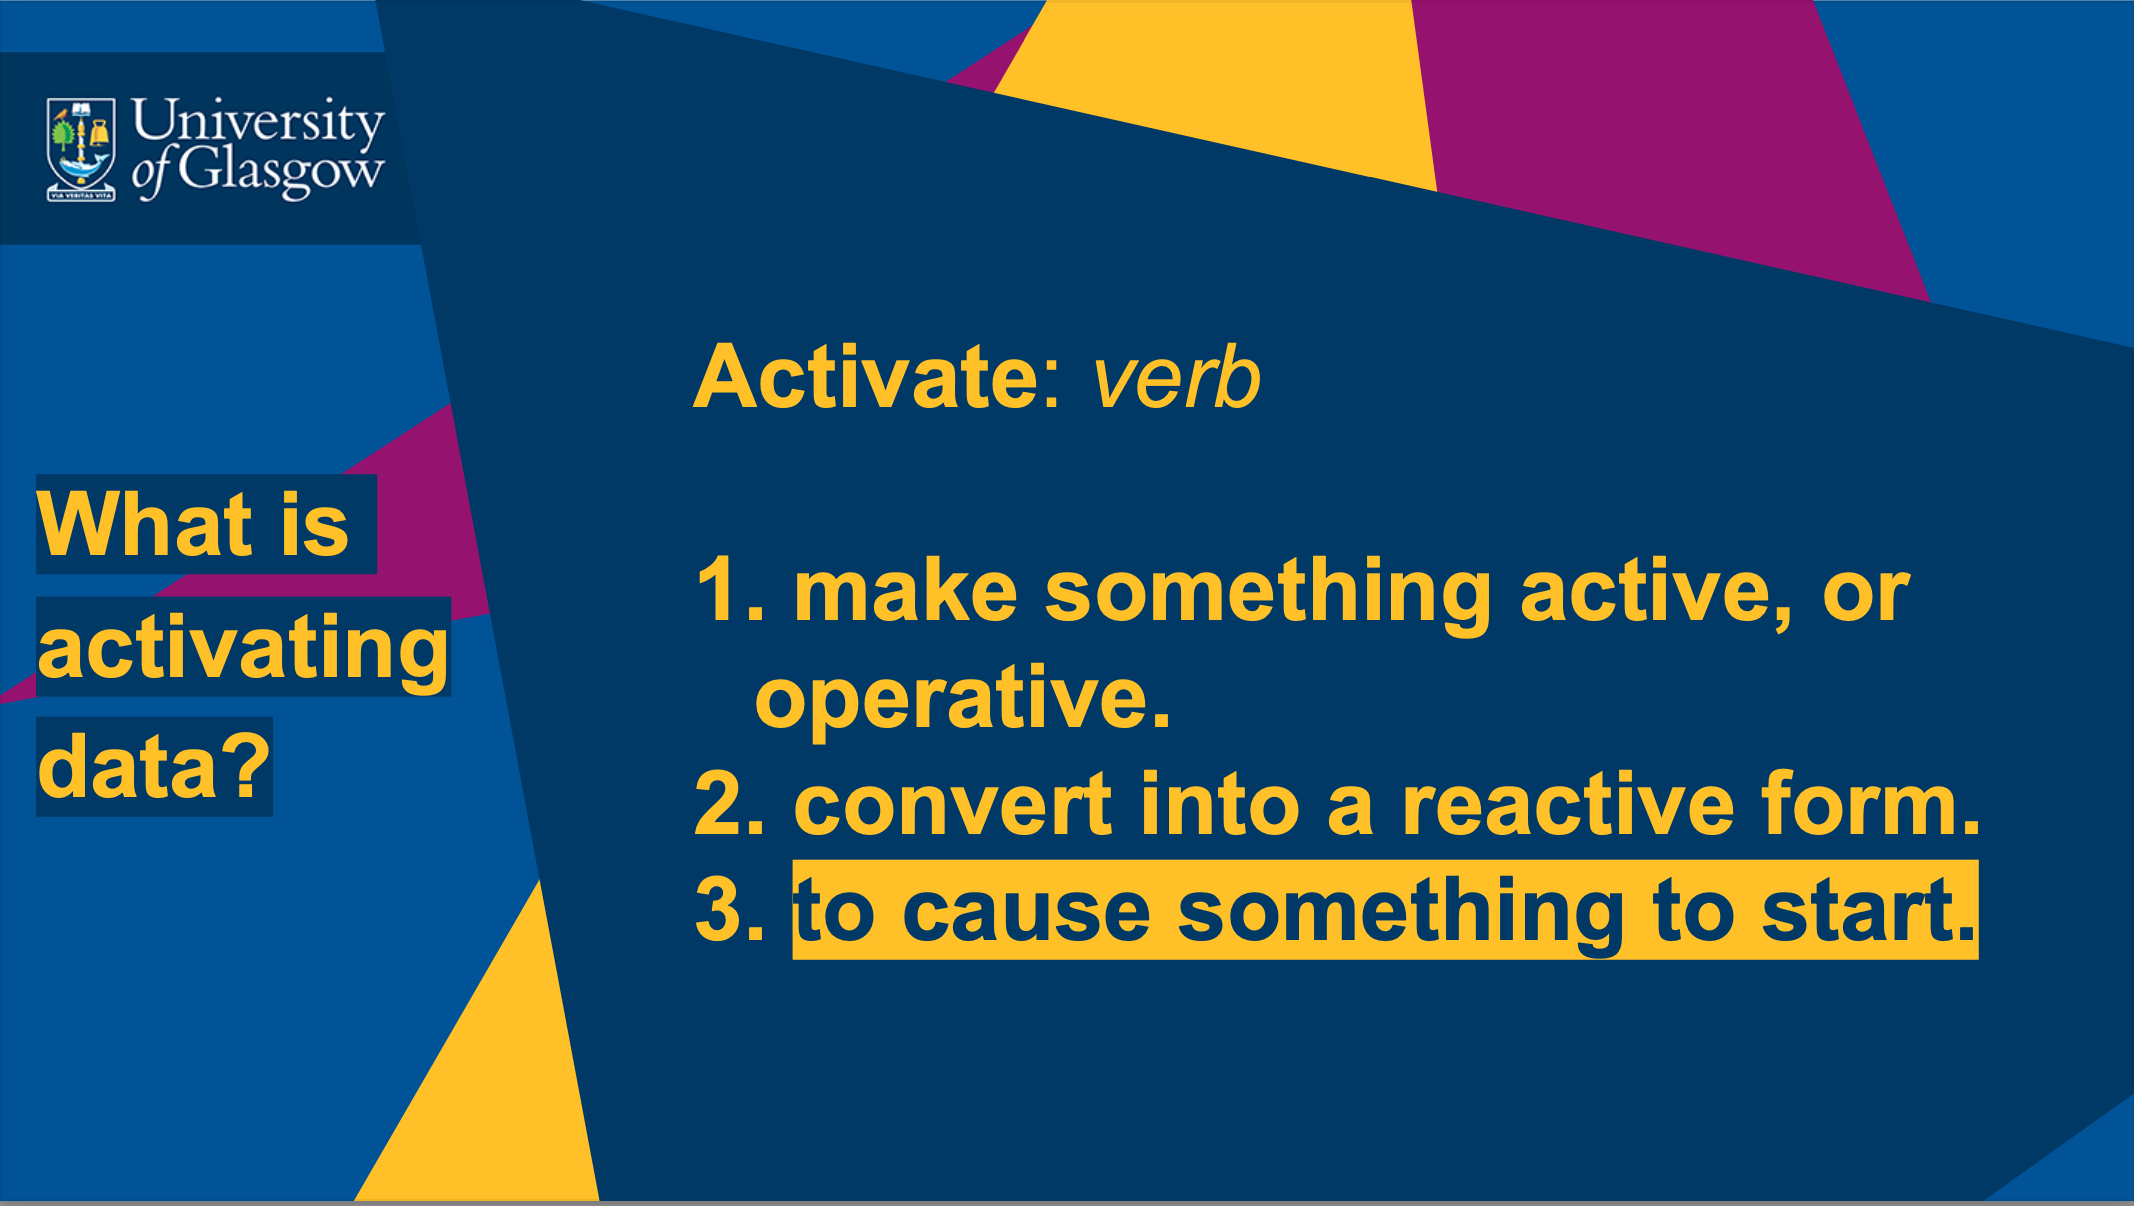 A powerpoint slide explaining the meaning of the word activate. Highlighted text reads 'to cause something to start'